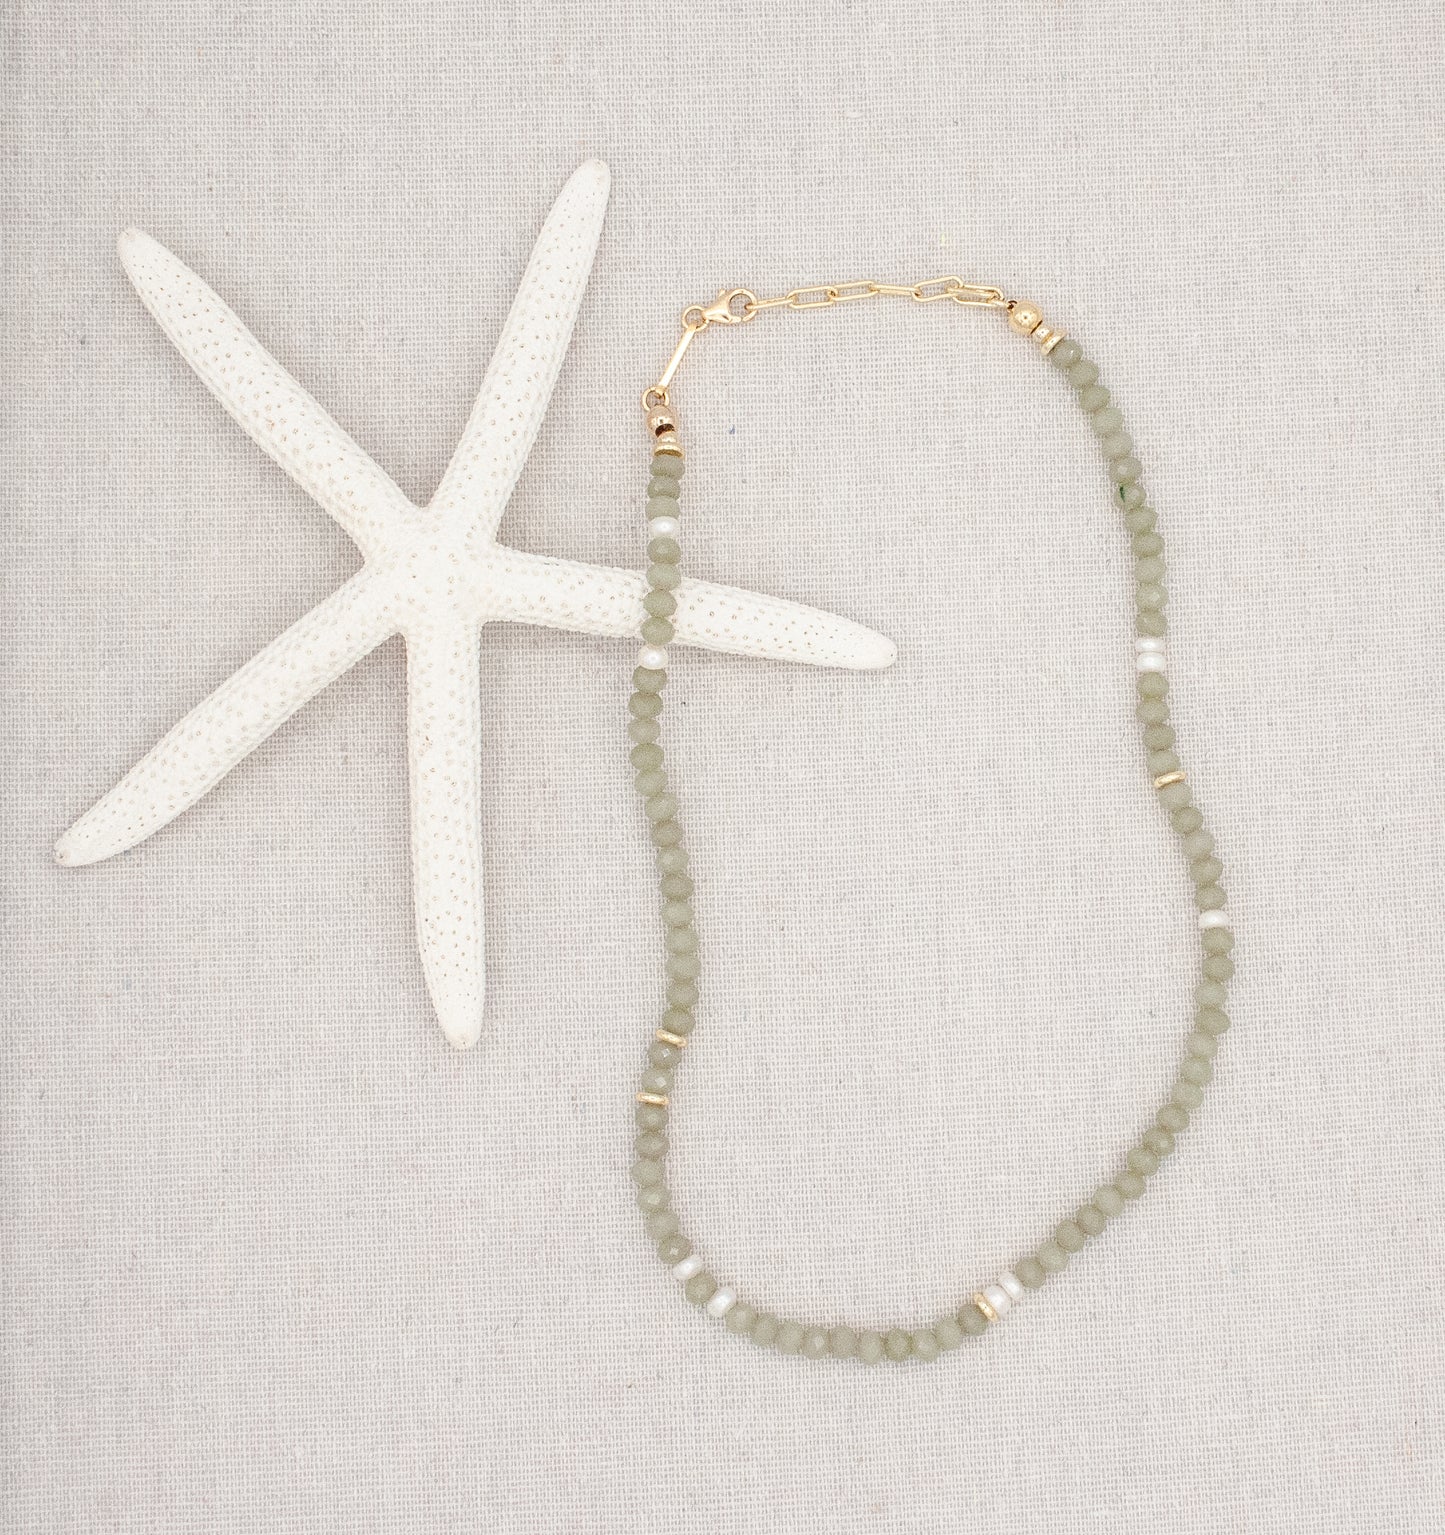 Moss Necklace :: 14k Gold Filled